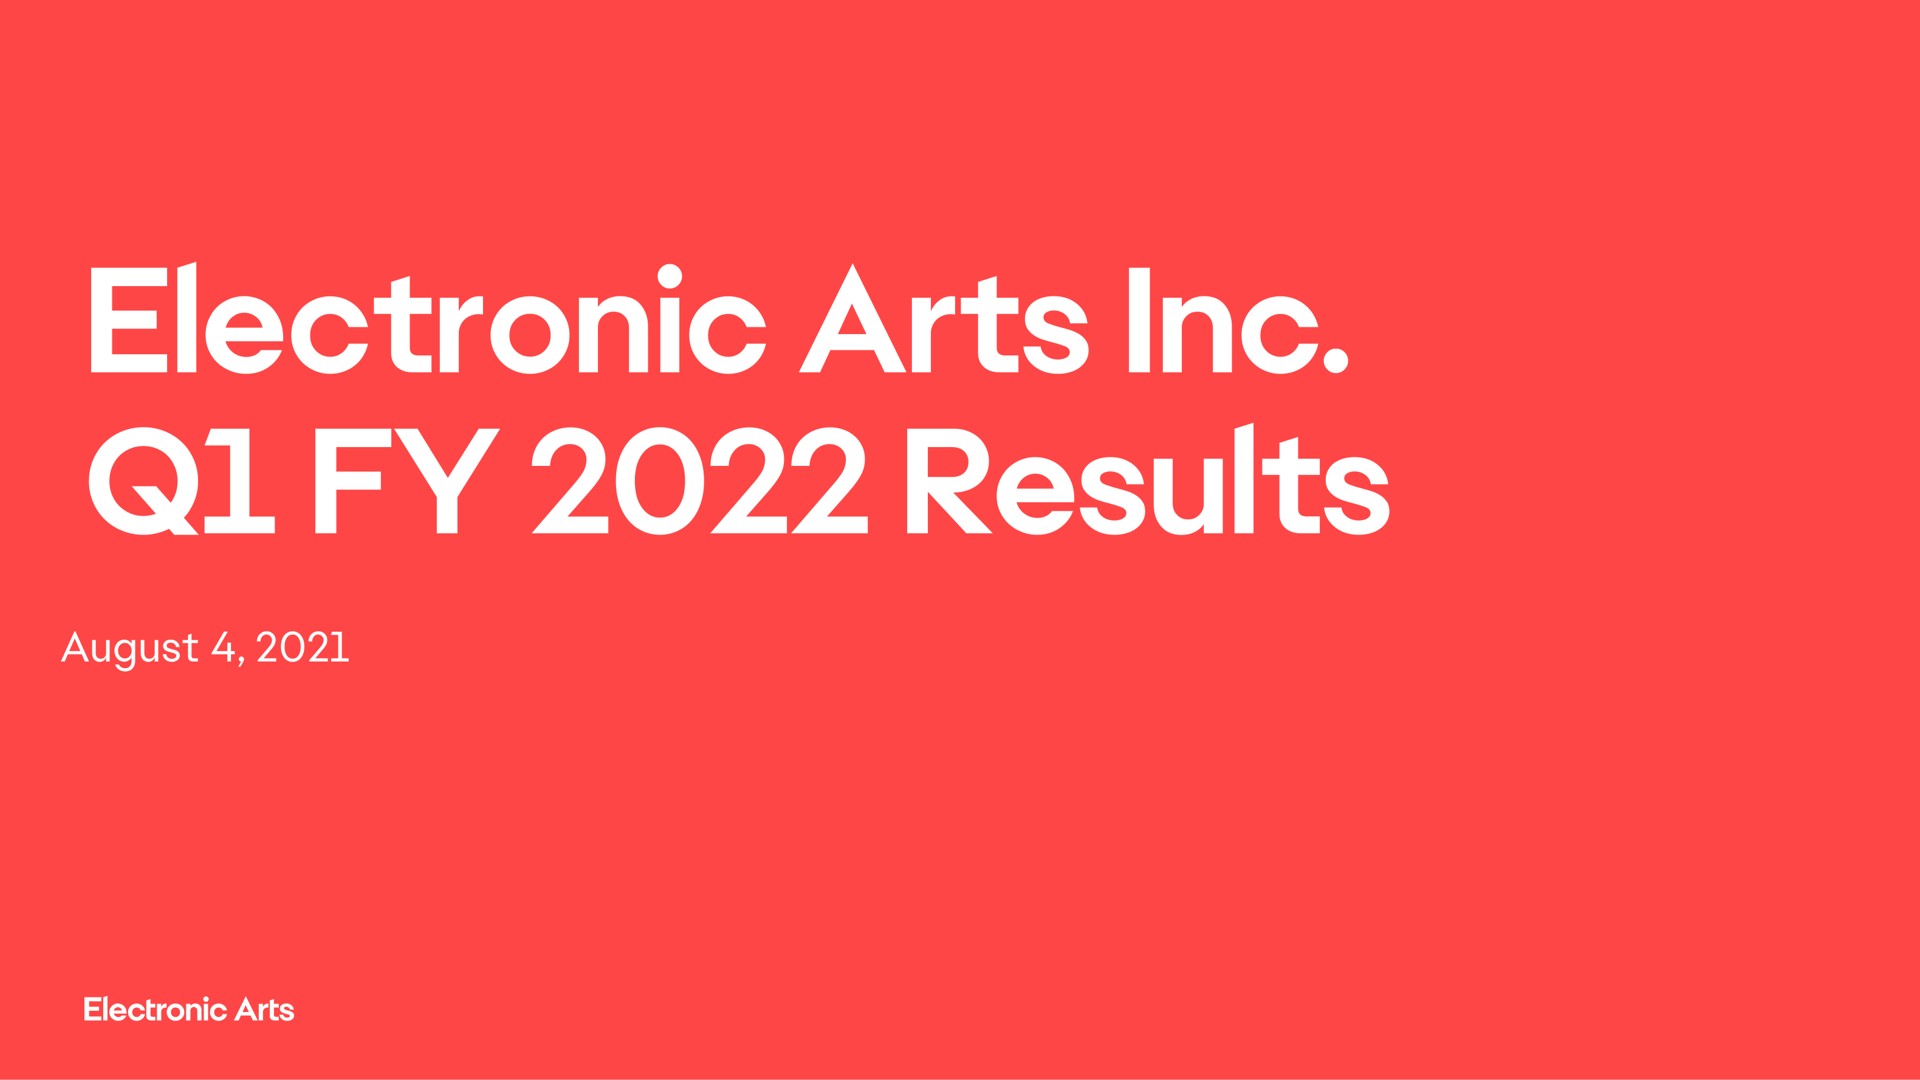 electronic arts results august | Electronic Arts